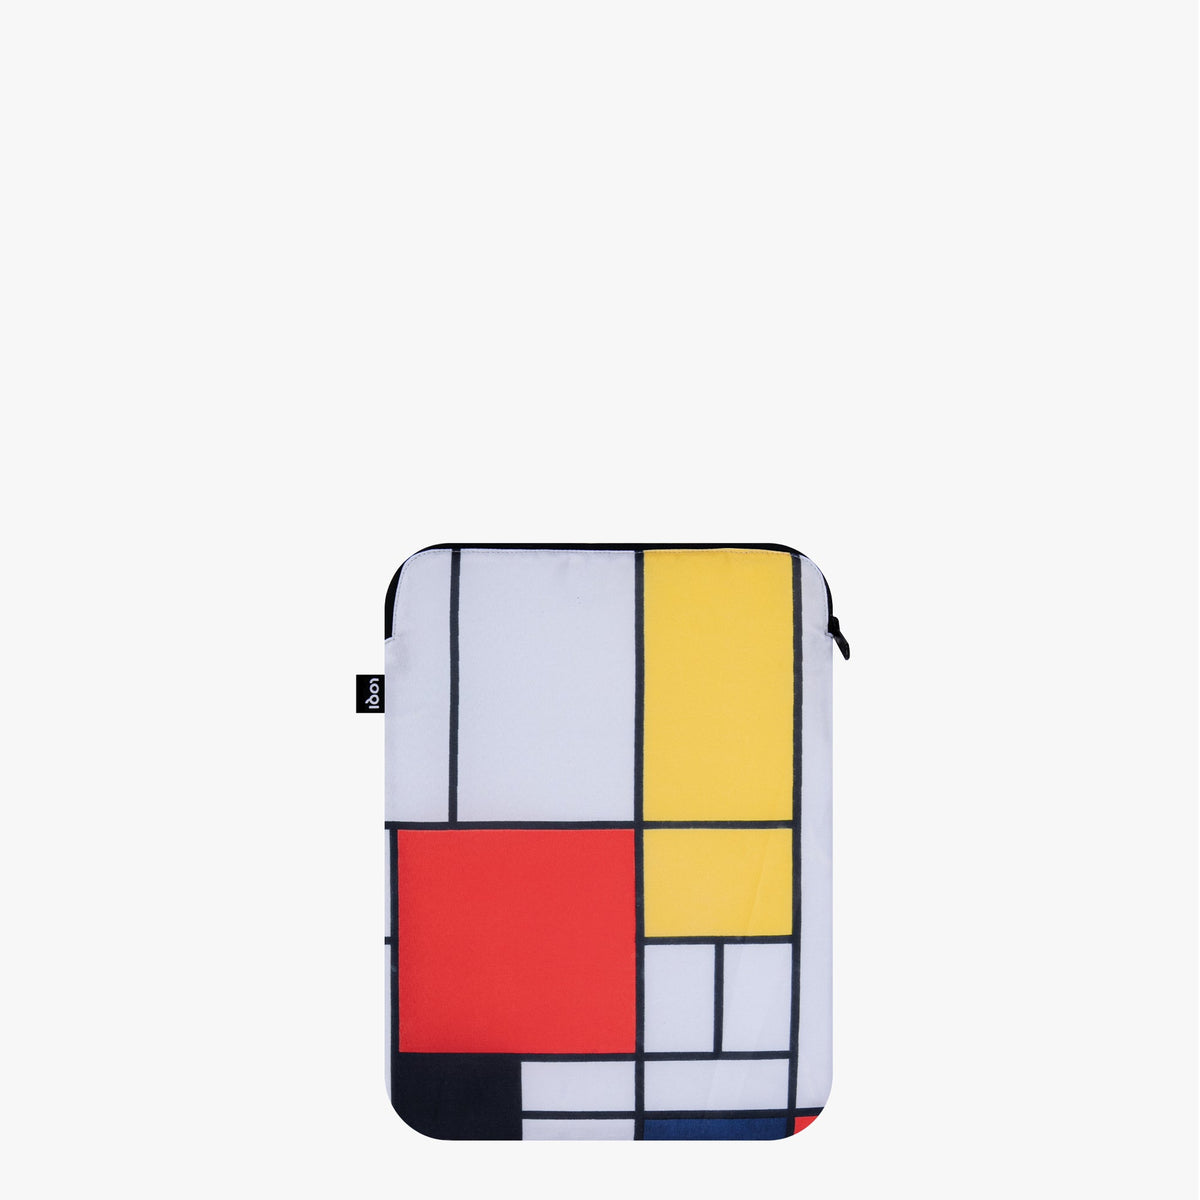 Composition with Red, Yellow, Blue and Black Recycled Laptop Sleeve 24 x 33 cm